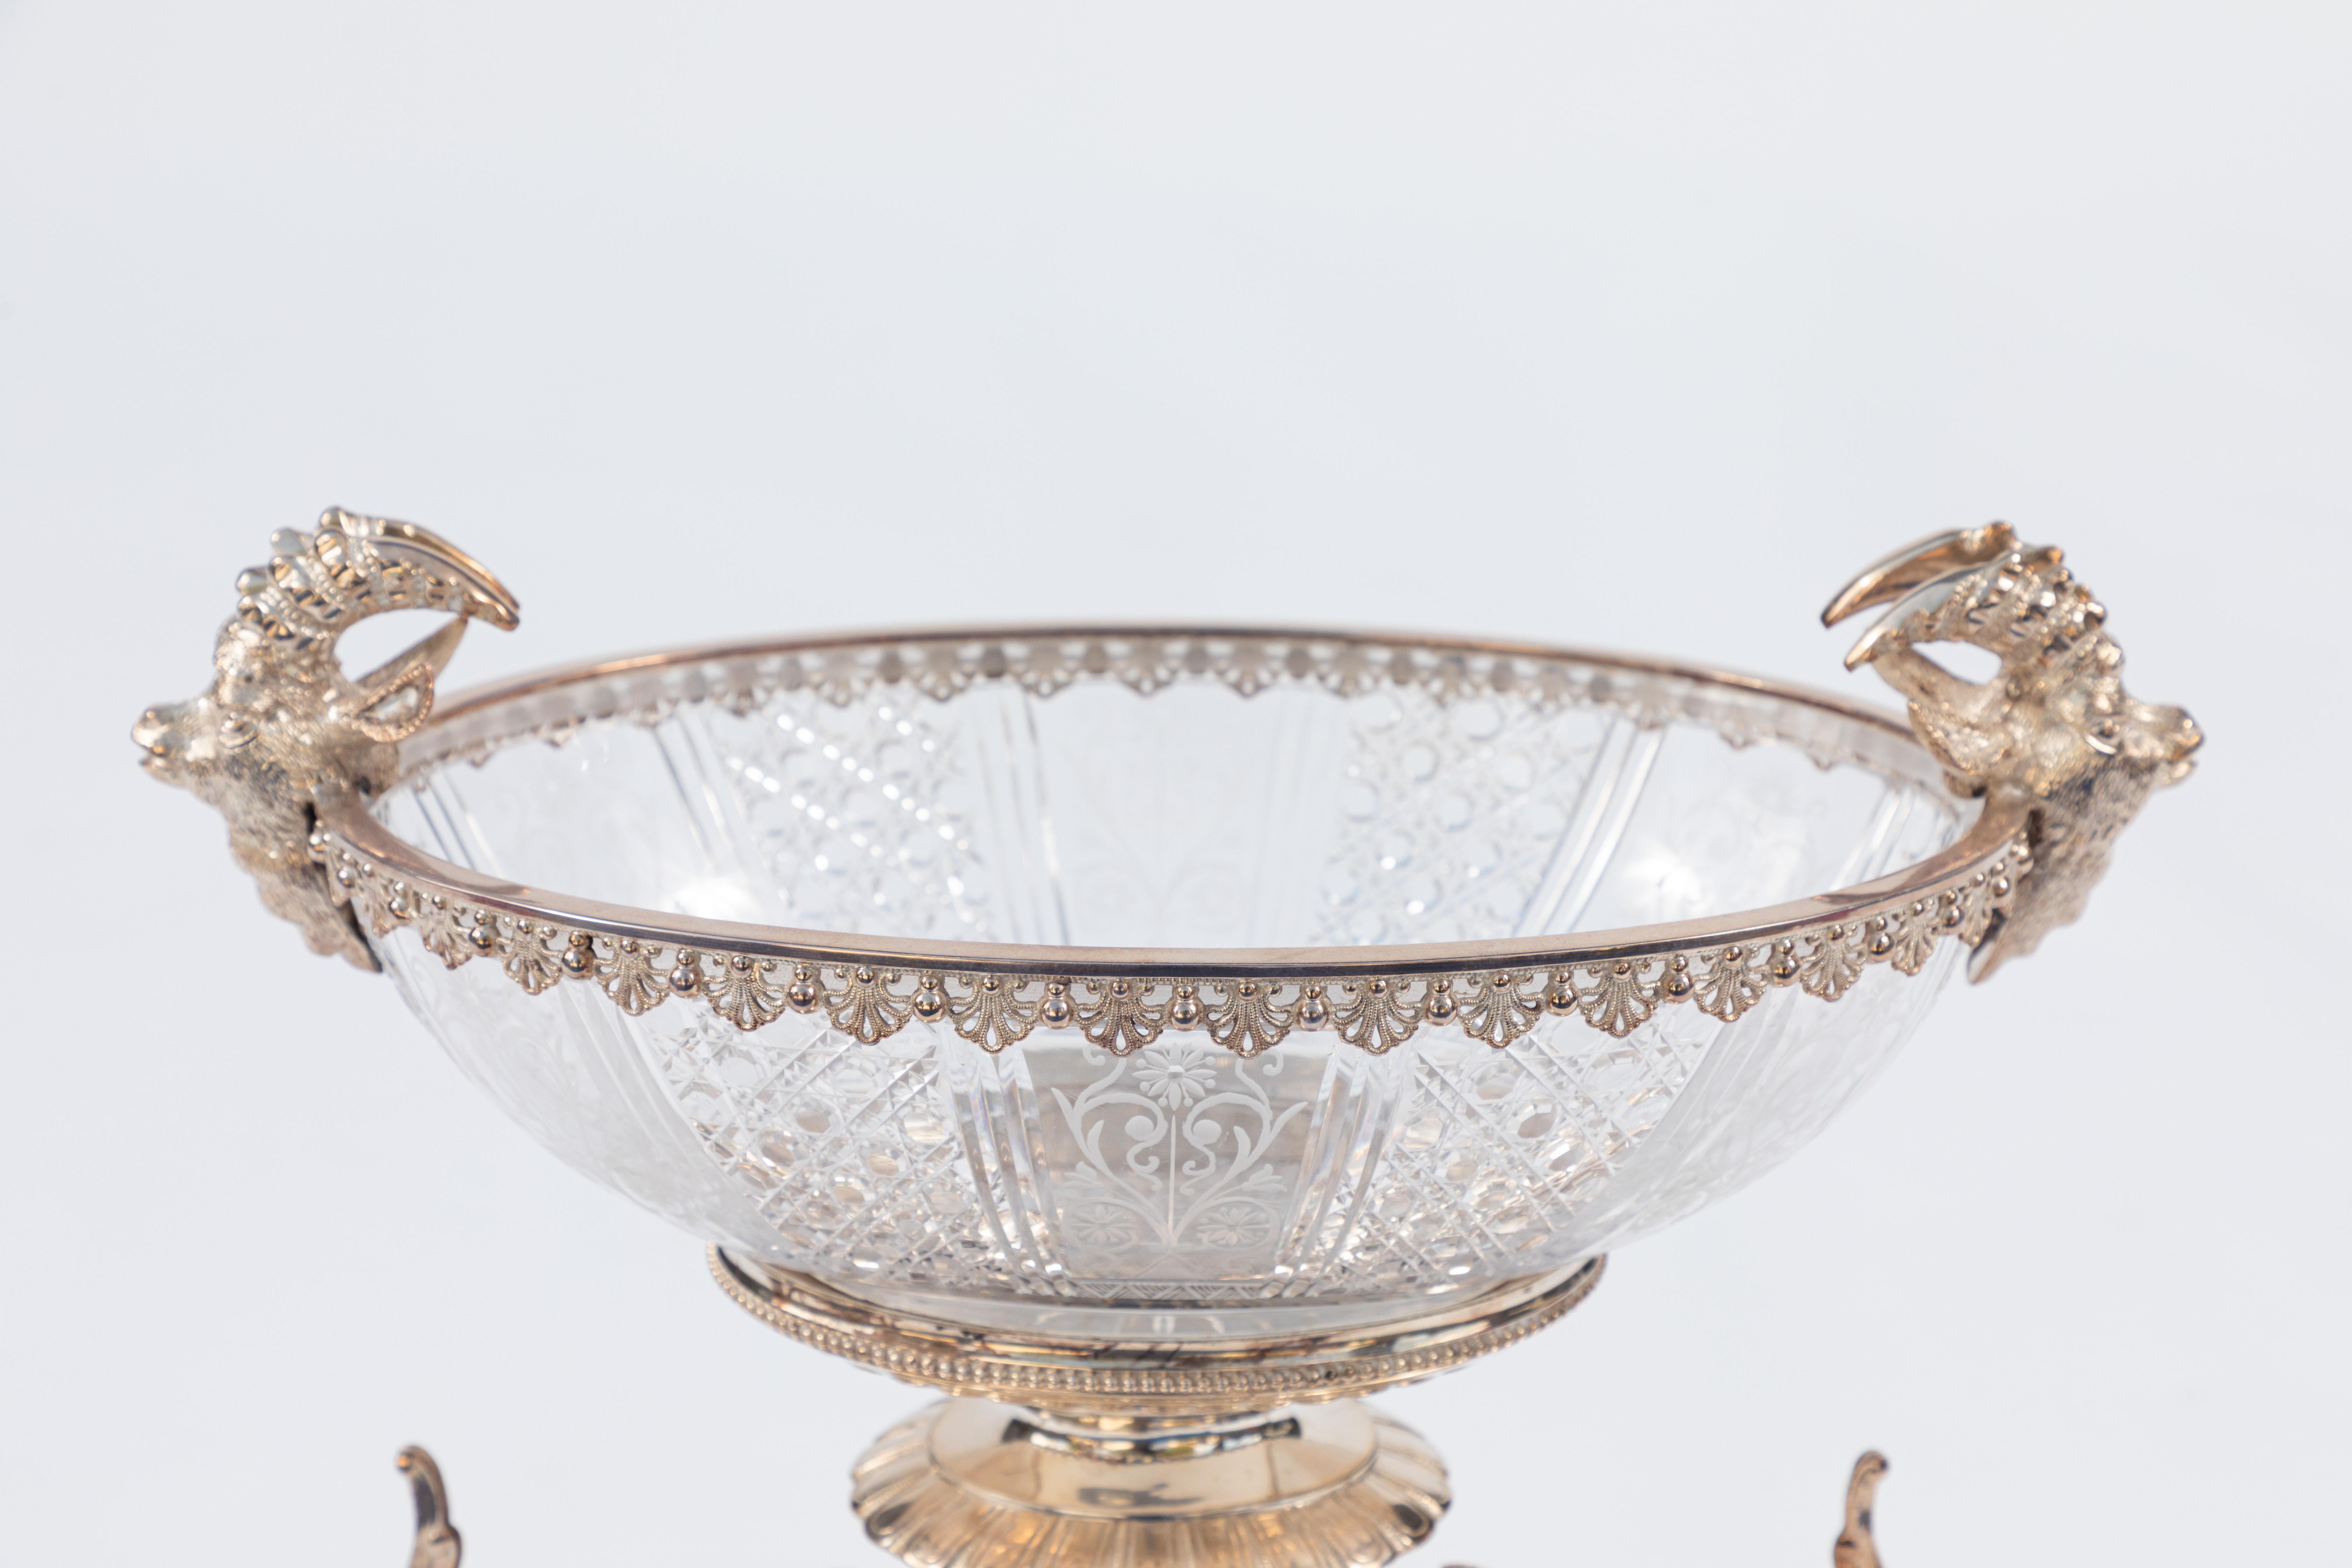 Neoclassical 1900s Elkington and Company Sheffield Silver Centerpiece Bowl